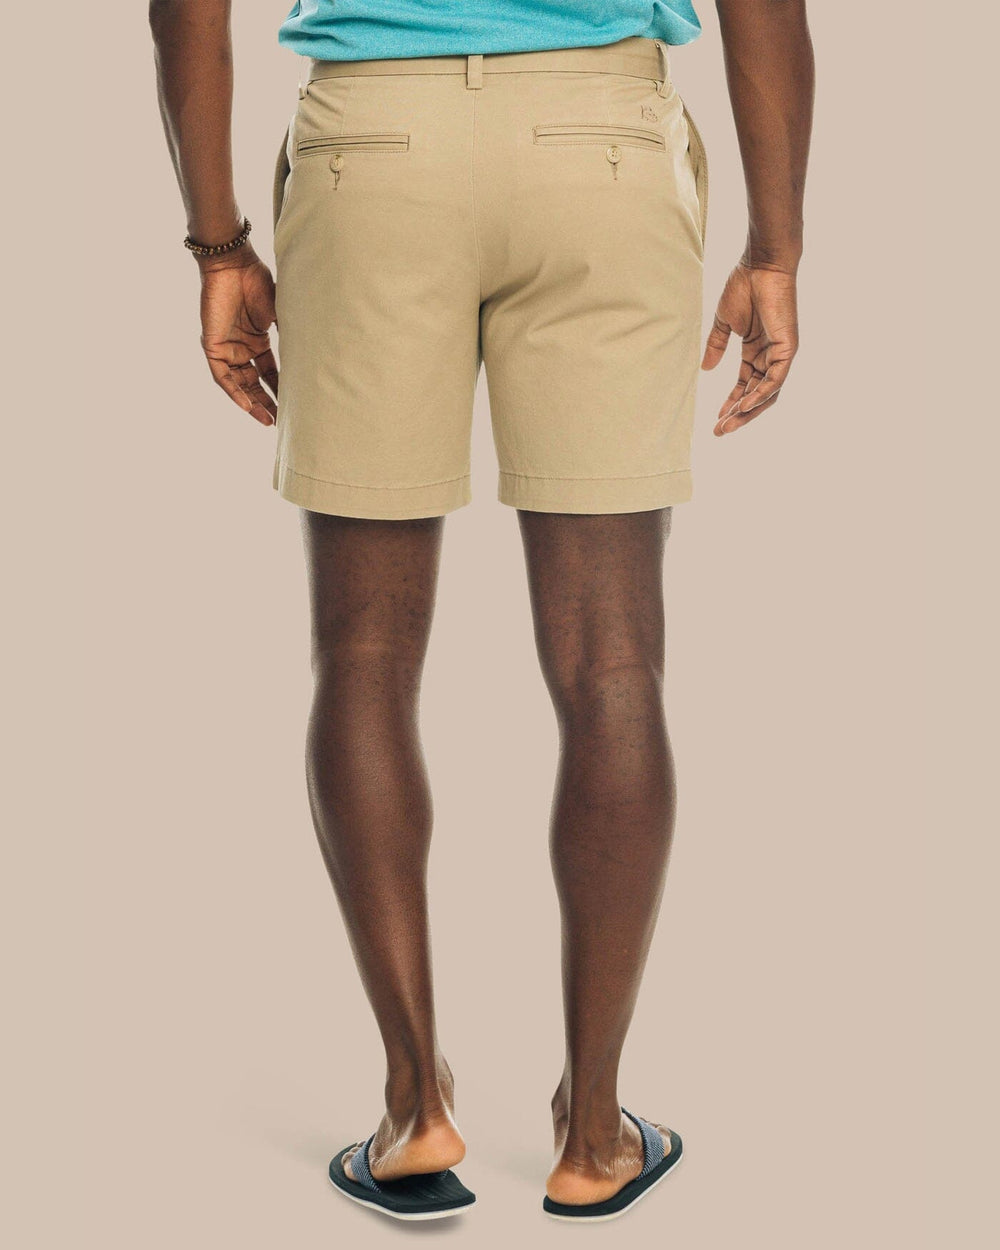 The back view of the Men's New Channel Marker 9 Inch Short by Southern Tide - Sandstone Khaki